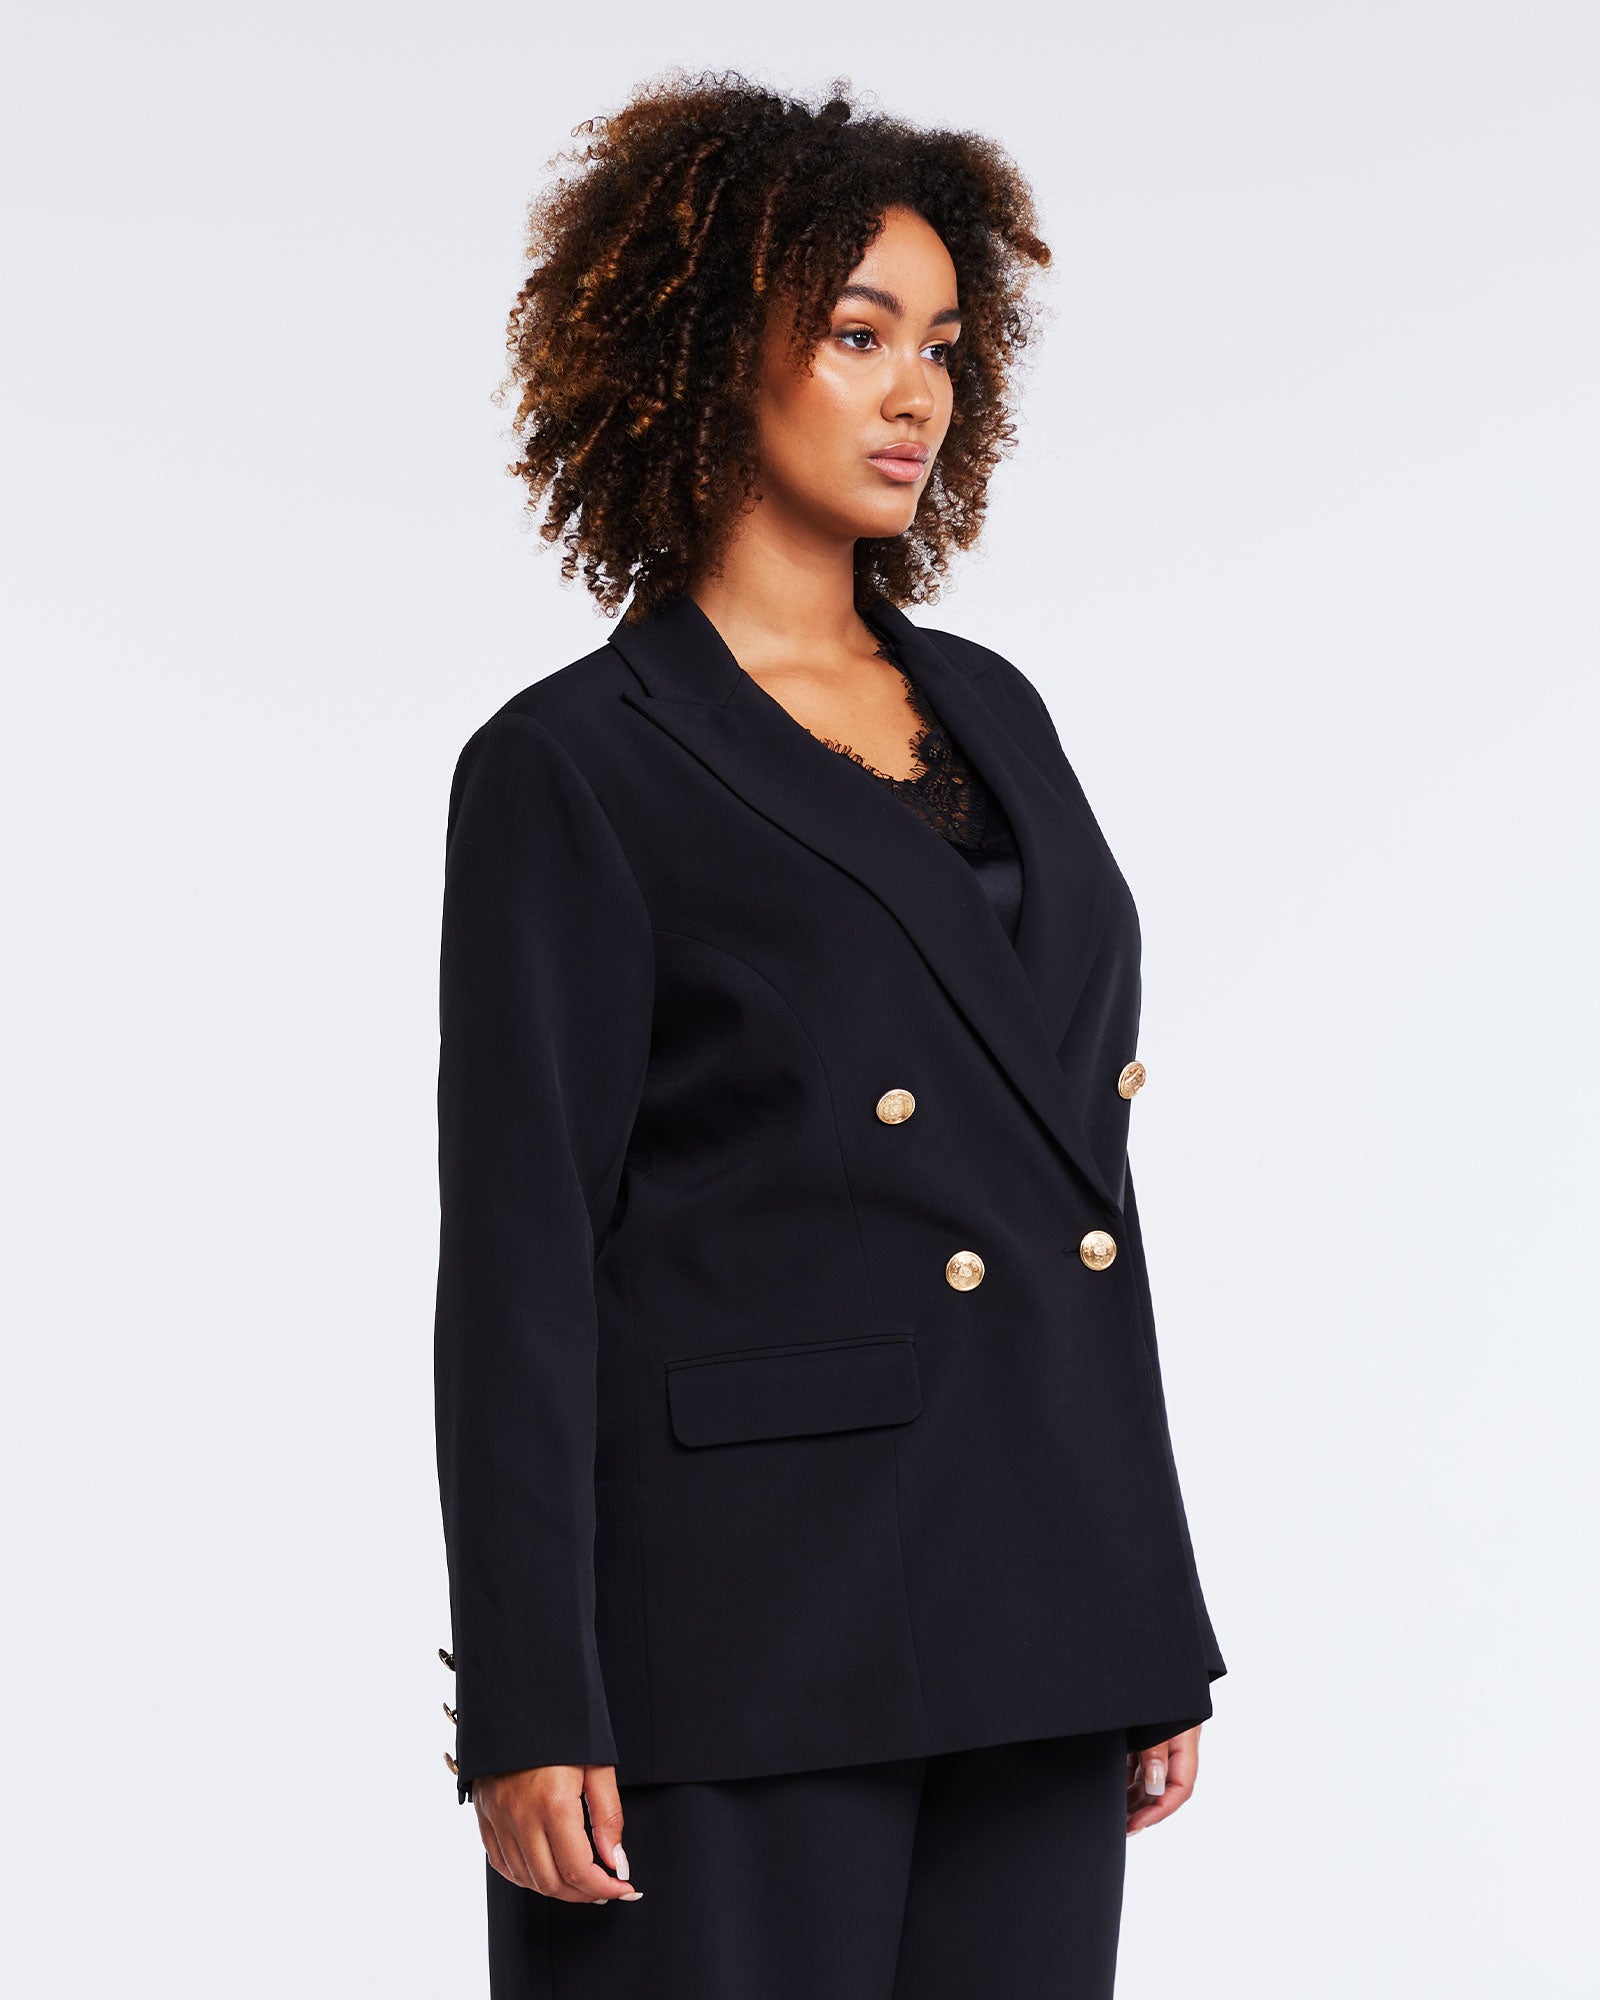 The model is wearing a plus-size Savannah Double-Breasted Black Blazer with gold buttons.